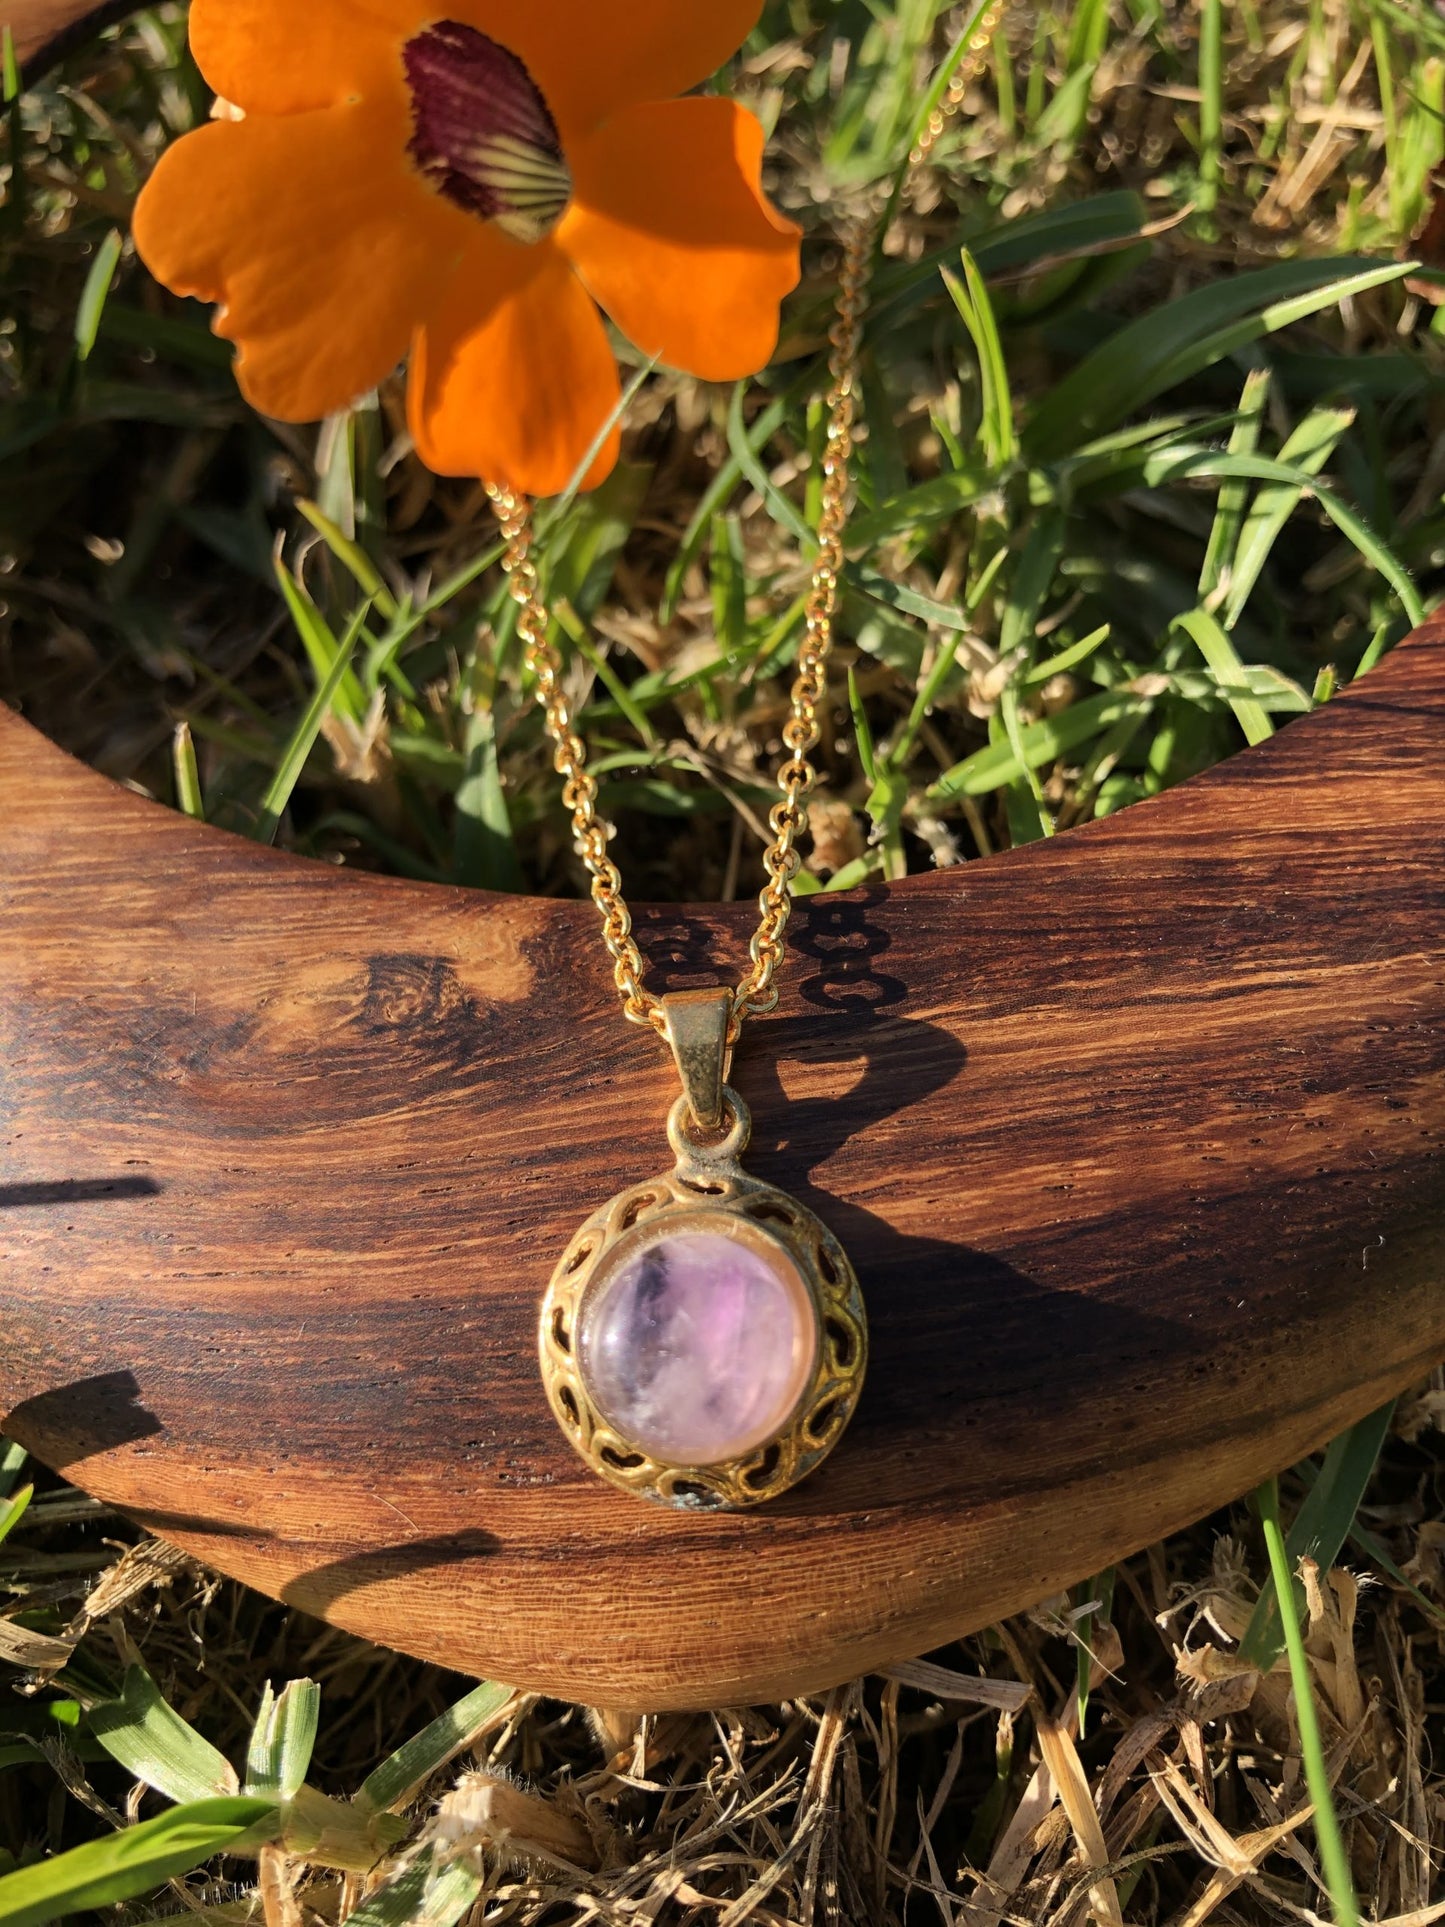 Necklace with natural Amethyst, delicate purple, hand cut to a 10mm round cabochon and set in a gold plated setting with 19 inch chain, ln wood